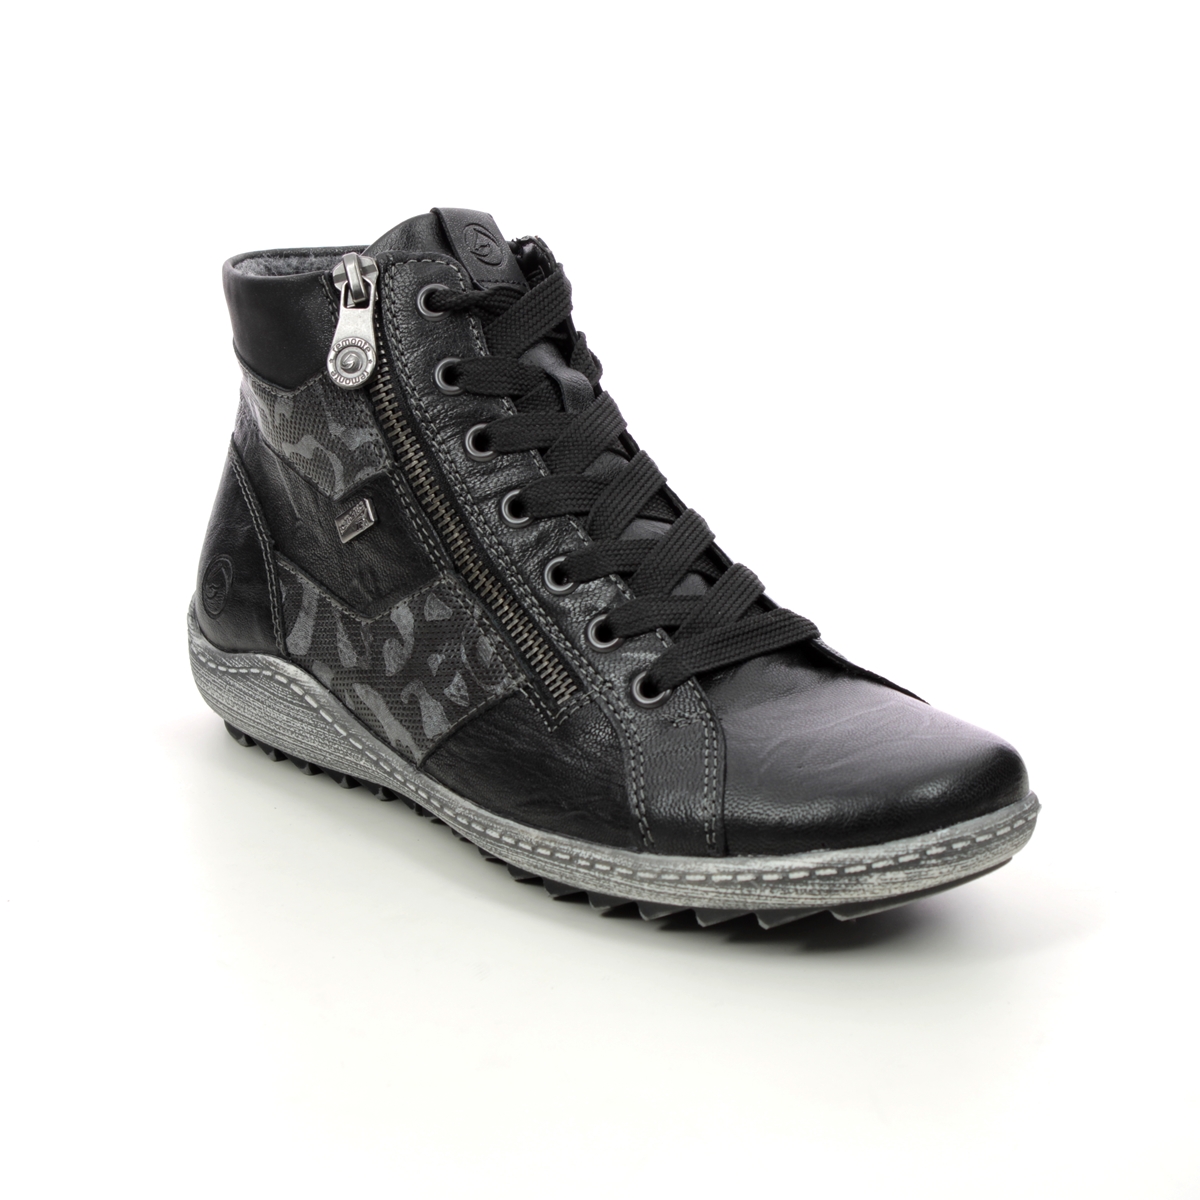 Remonte Ziginzips Tex Black Leather Womens Hi Tops R1484-02 In Size 39 In Plain Black Leather